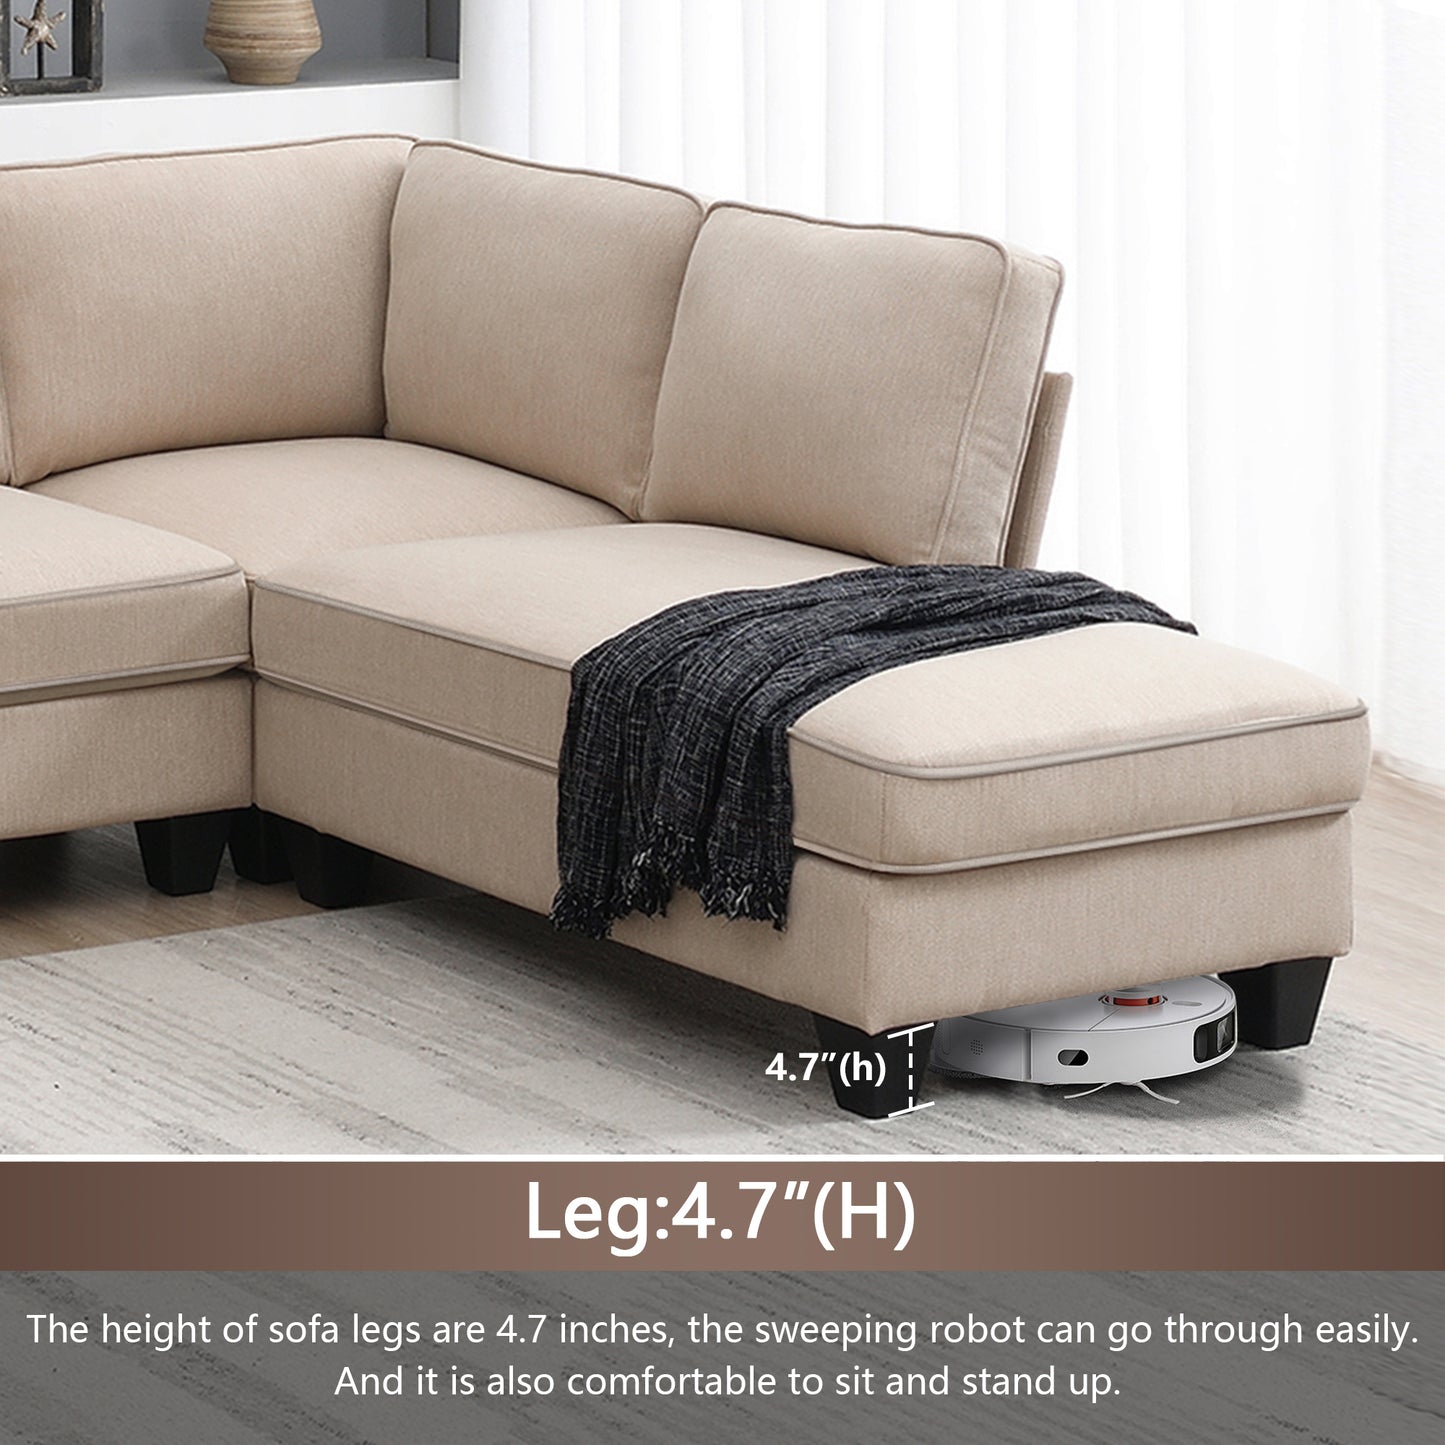 Modern L-Shaped 7-Seat Linen Sofa Set with Chaise Lounge